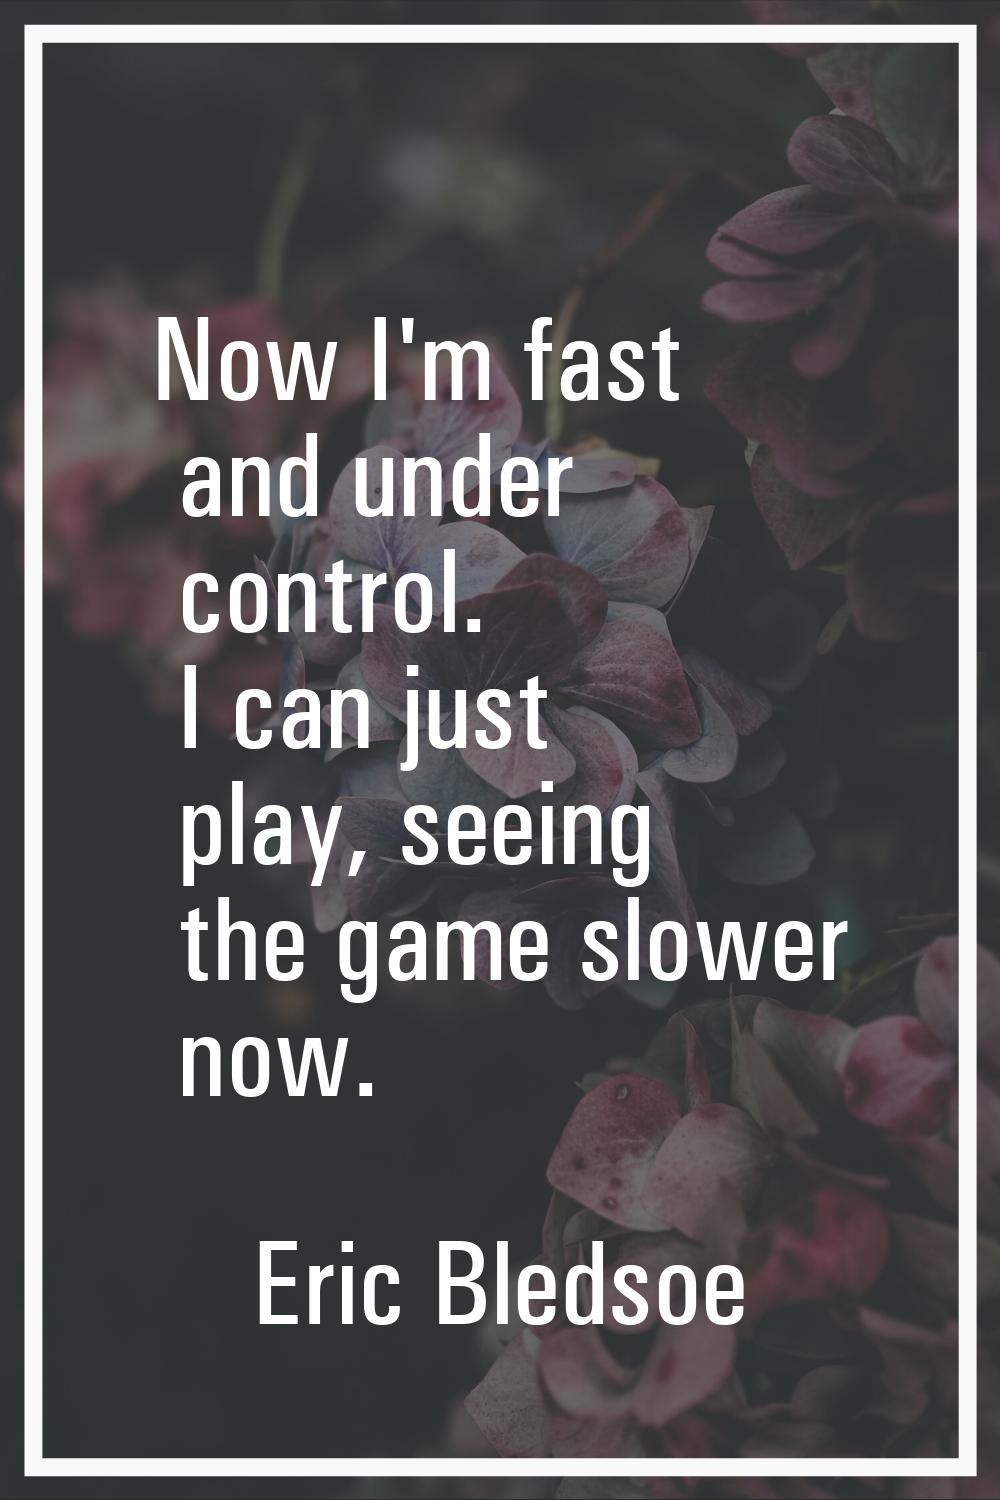 Now I'm fast and under control. I can just play, seeing the game slower now.